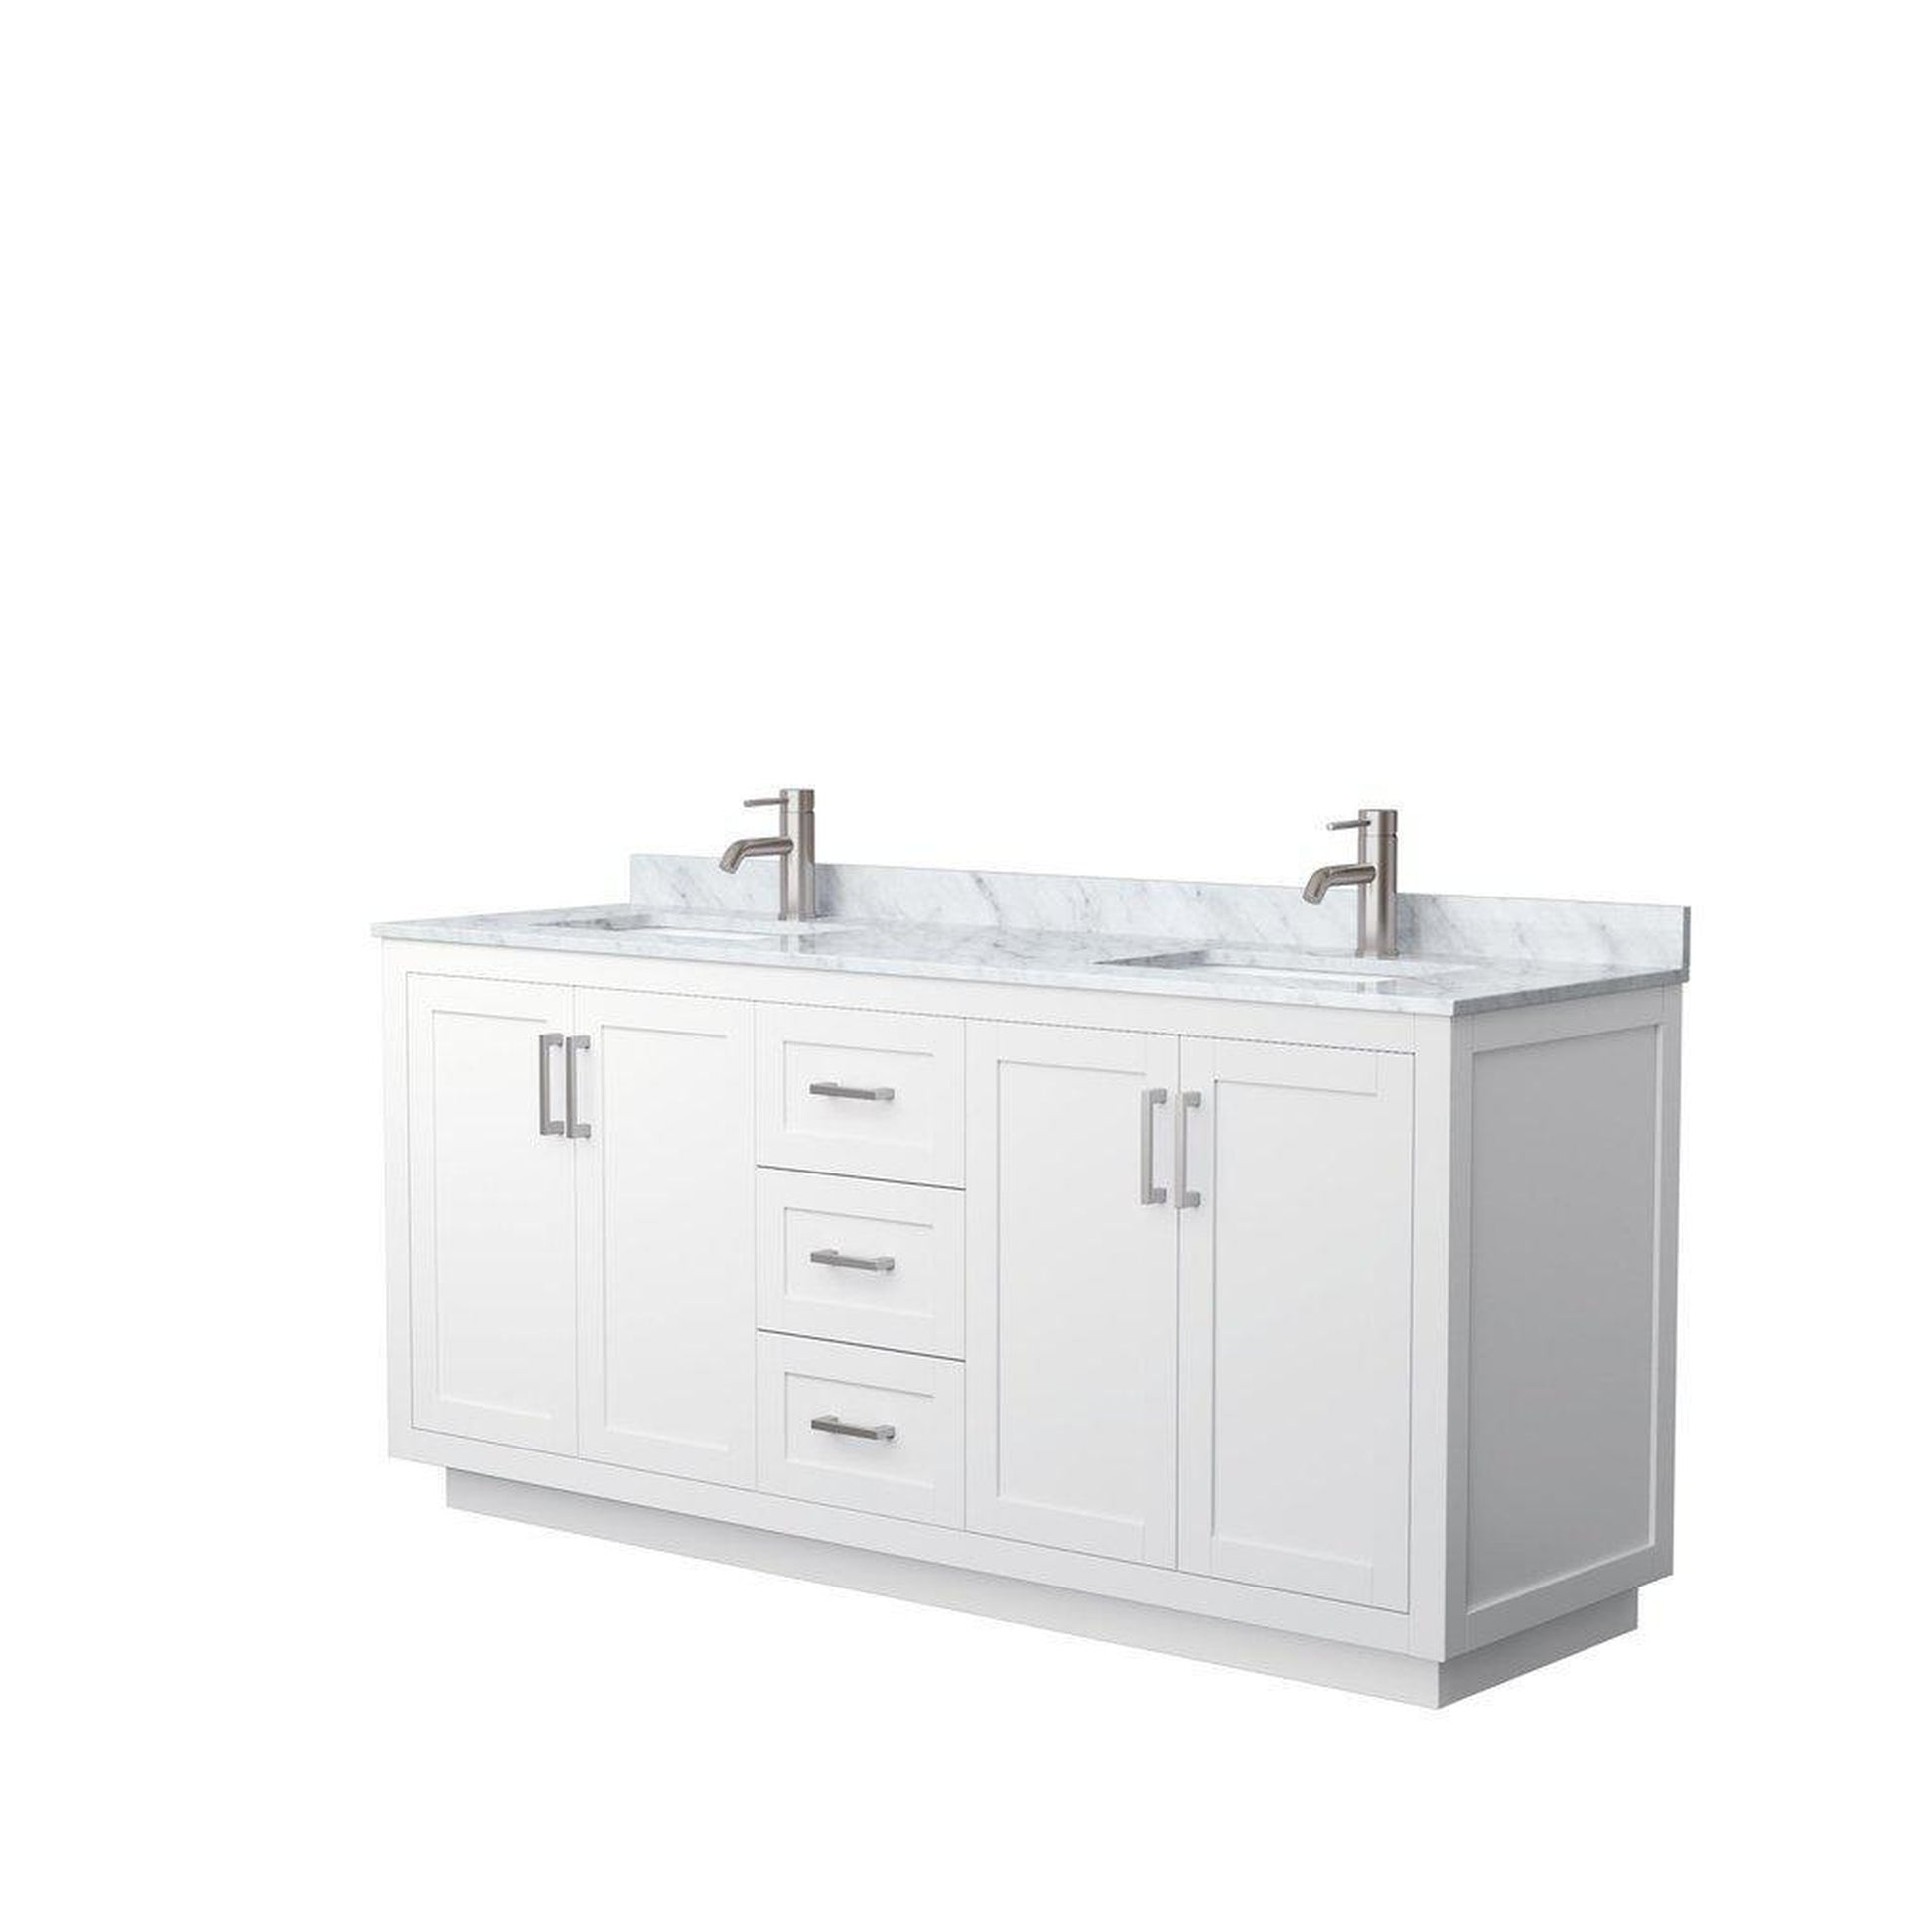 Wyndham Collection Miranda 72" Double Bathroom White Vanity Set With White Carrara Marble Countertop, Undermount Square Sink, And Brushed Nickel Trim